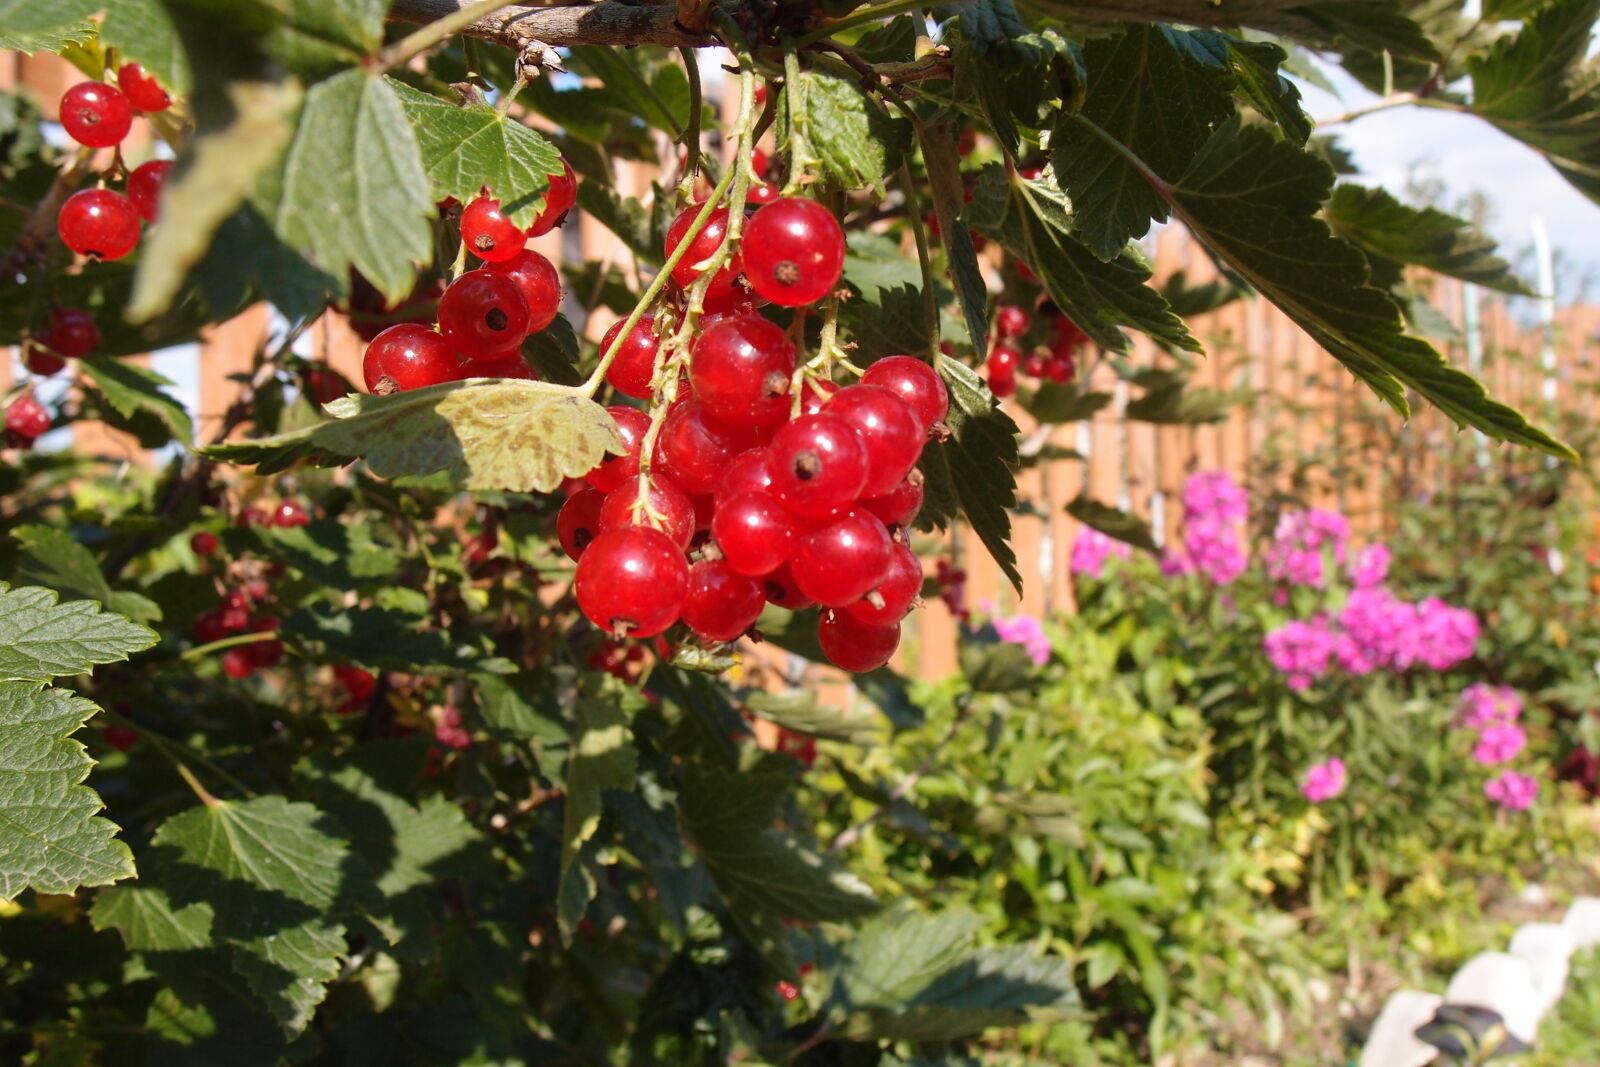 Olympus XZ-1 sample photo. Currant, berry, summer photography